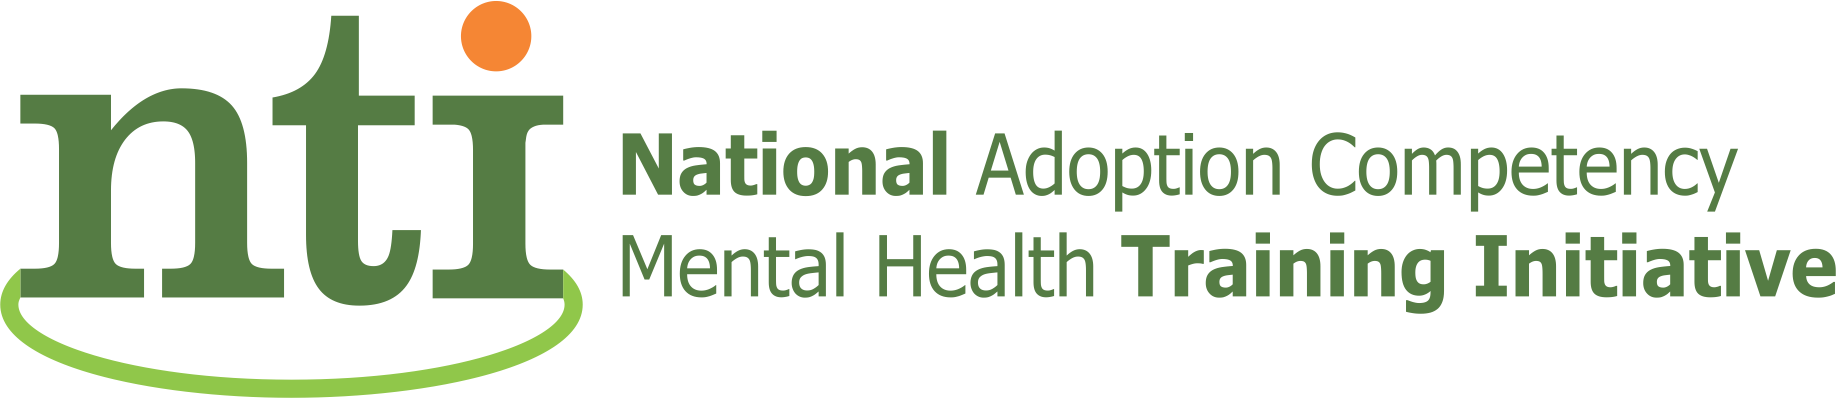 National Adoption Competency Mental Health Training Initiative